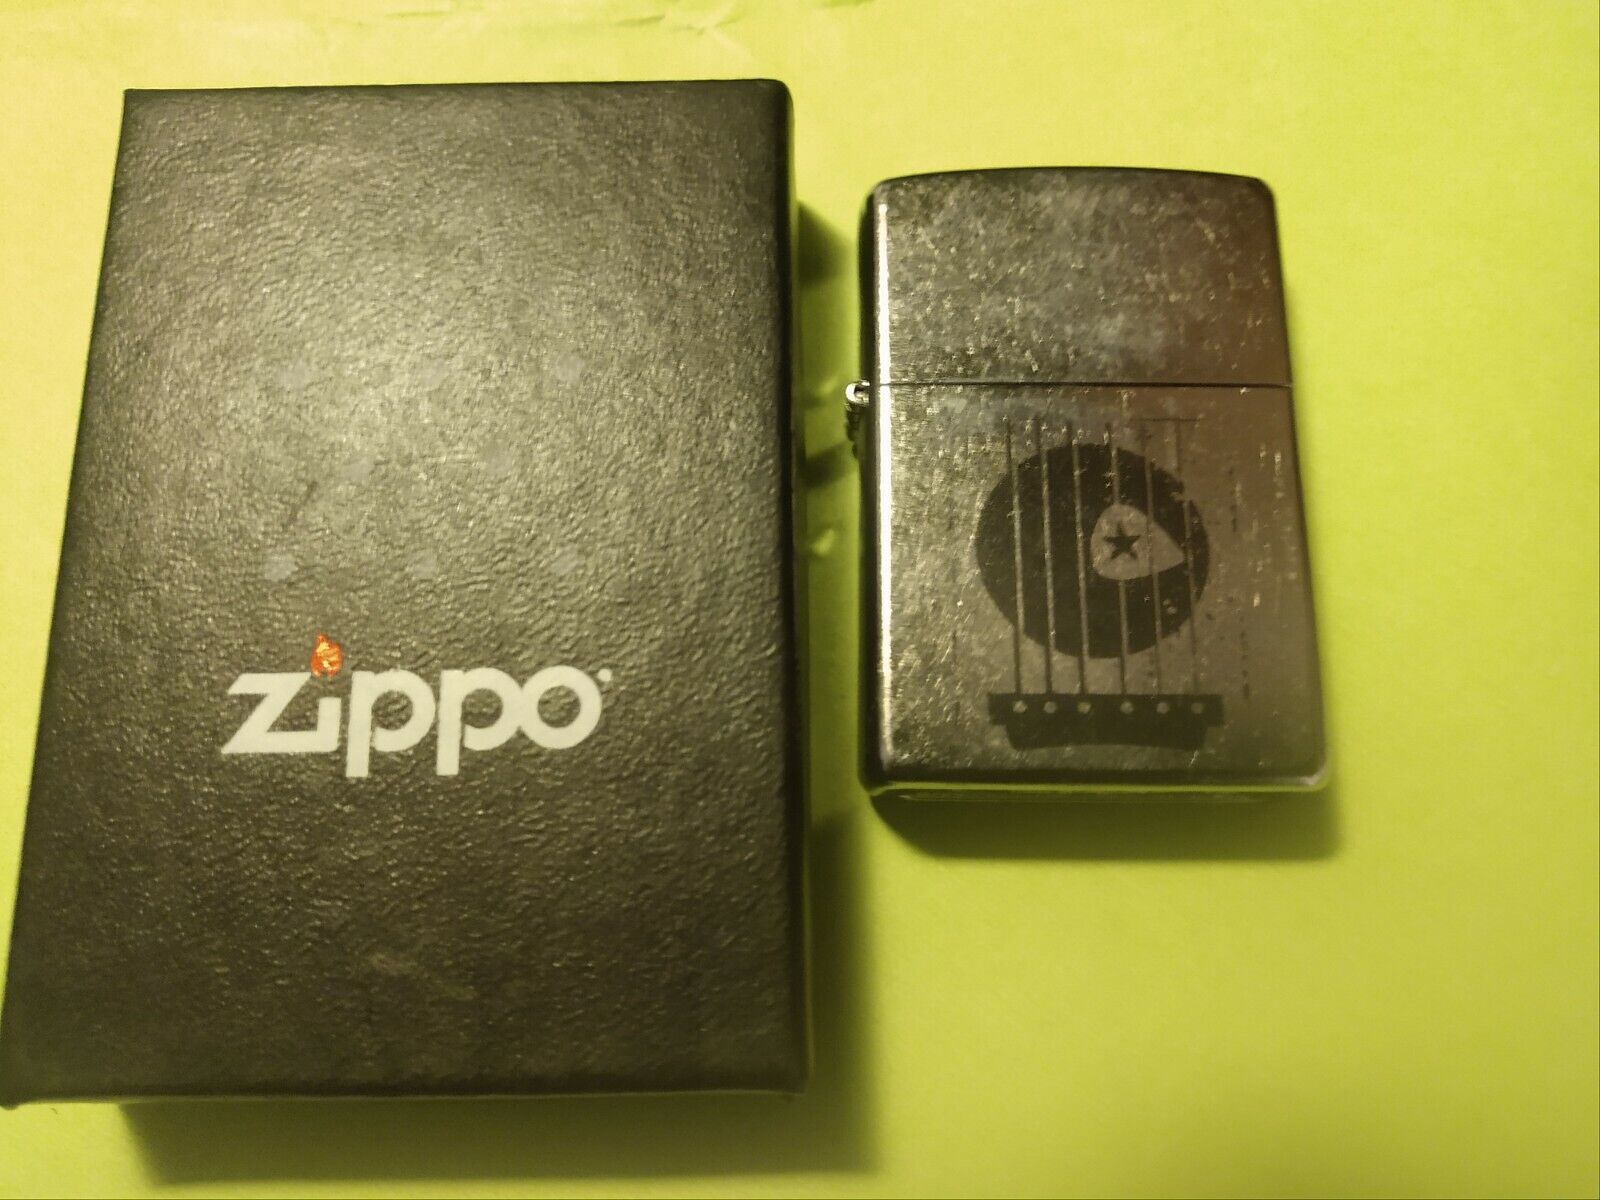 Marlboro Guitar Pick/strings Zippo new in box 2007 never filled mint condition